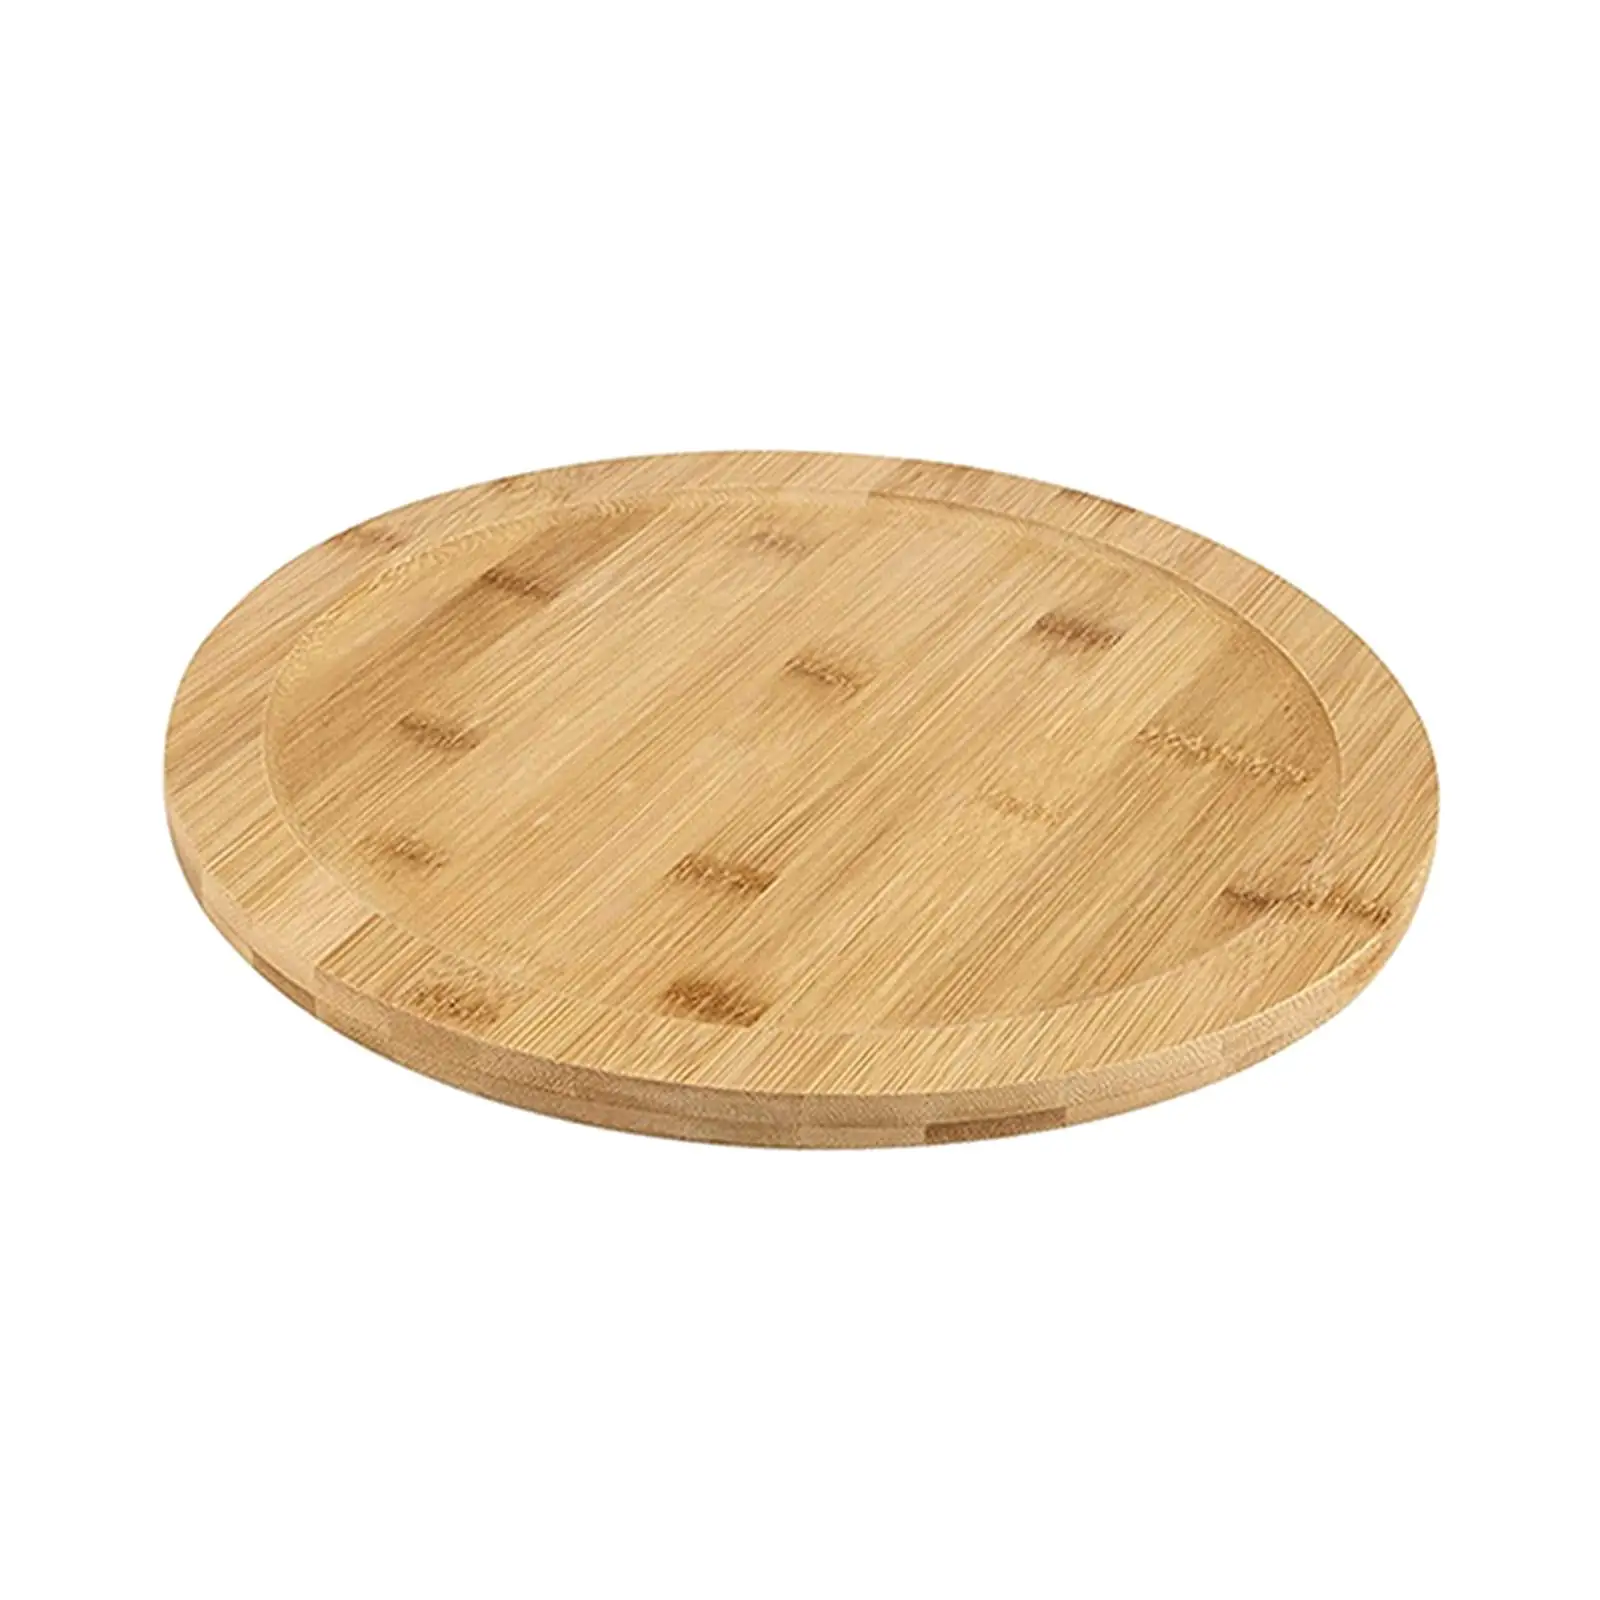 Serving Plate Cake Stand Swivel Plate Wooden Rotating Dining Plate for Pantry Kitchen Countertop Cabinet Home Dining Table